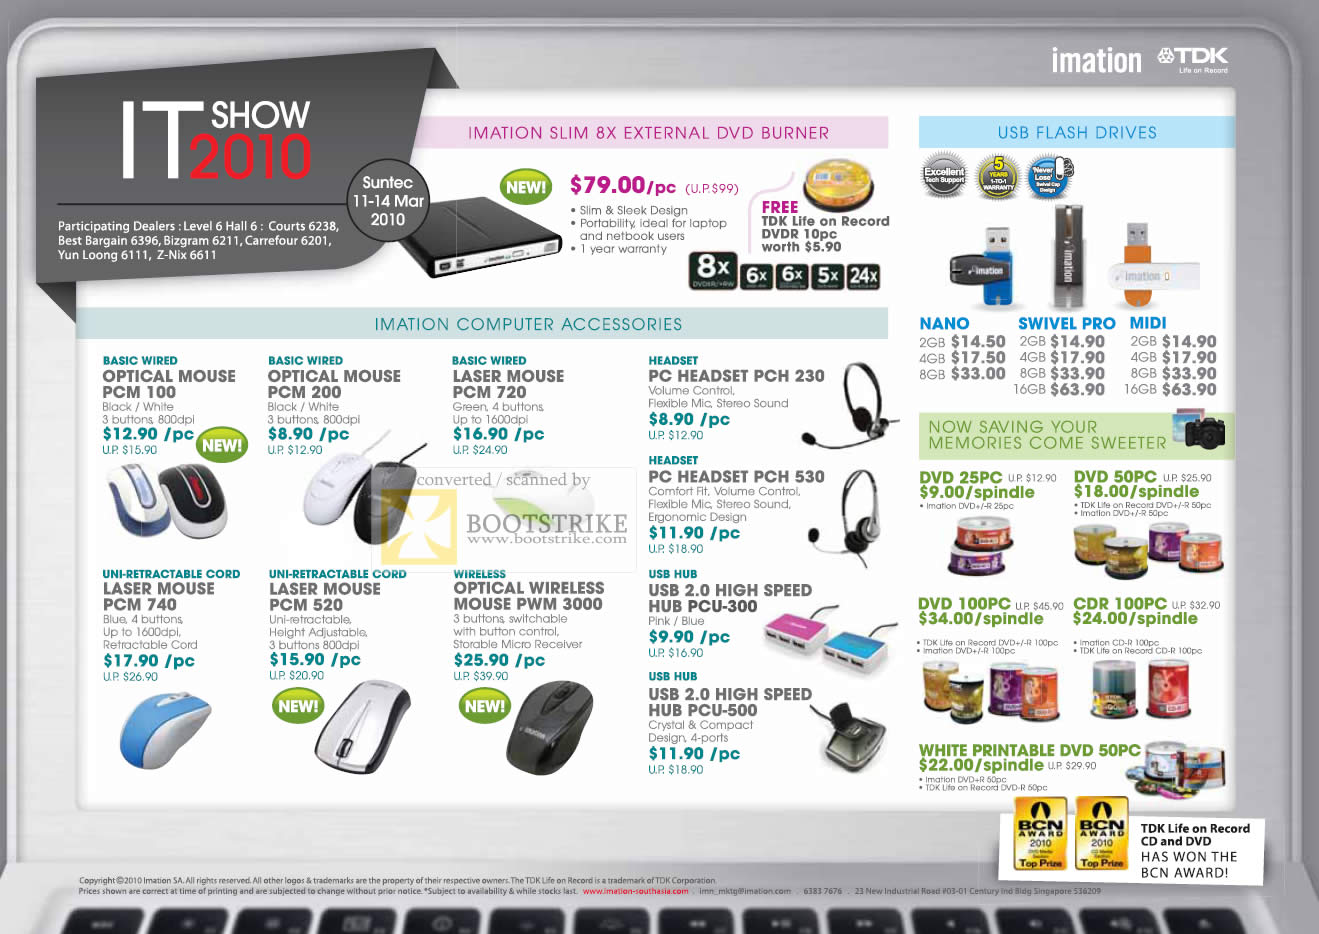 IT Show 2010 price list image brochure of Imation TDK External DVD Mouse Headset Hub USB Flash Drives DVDR CDR